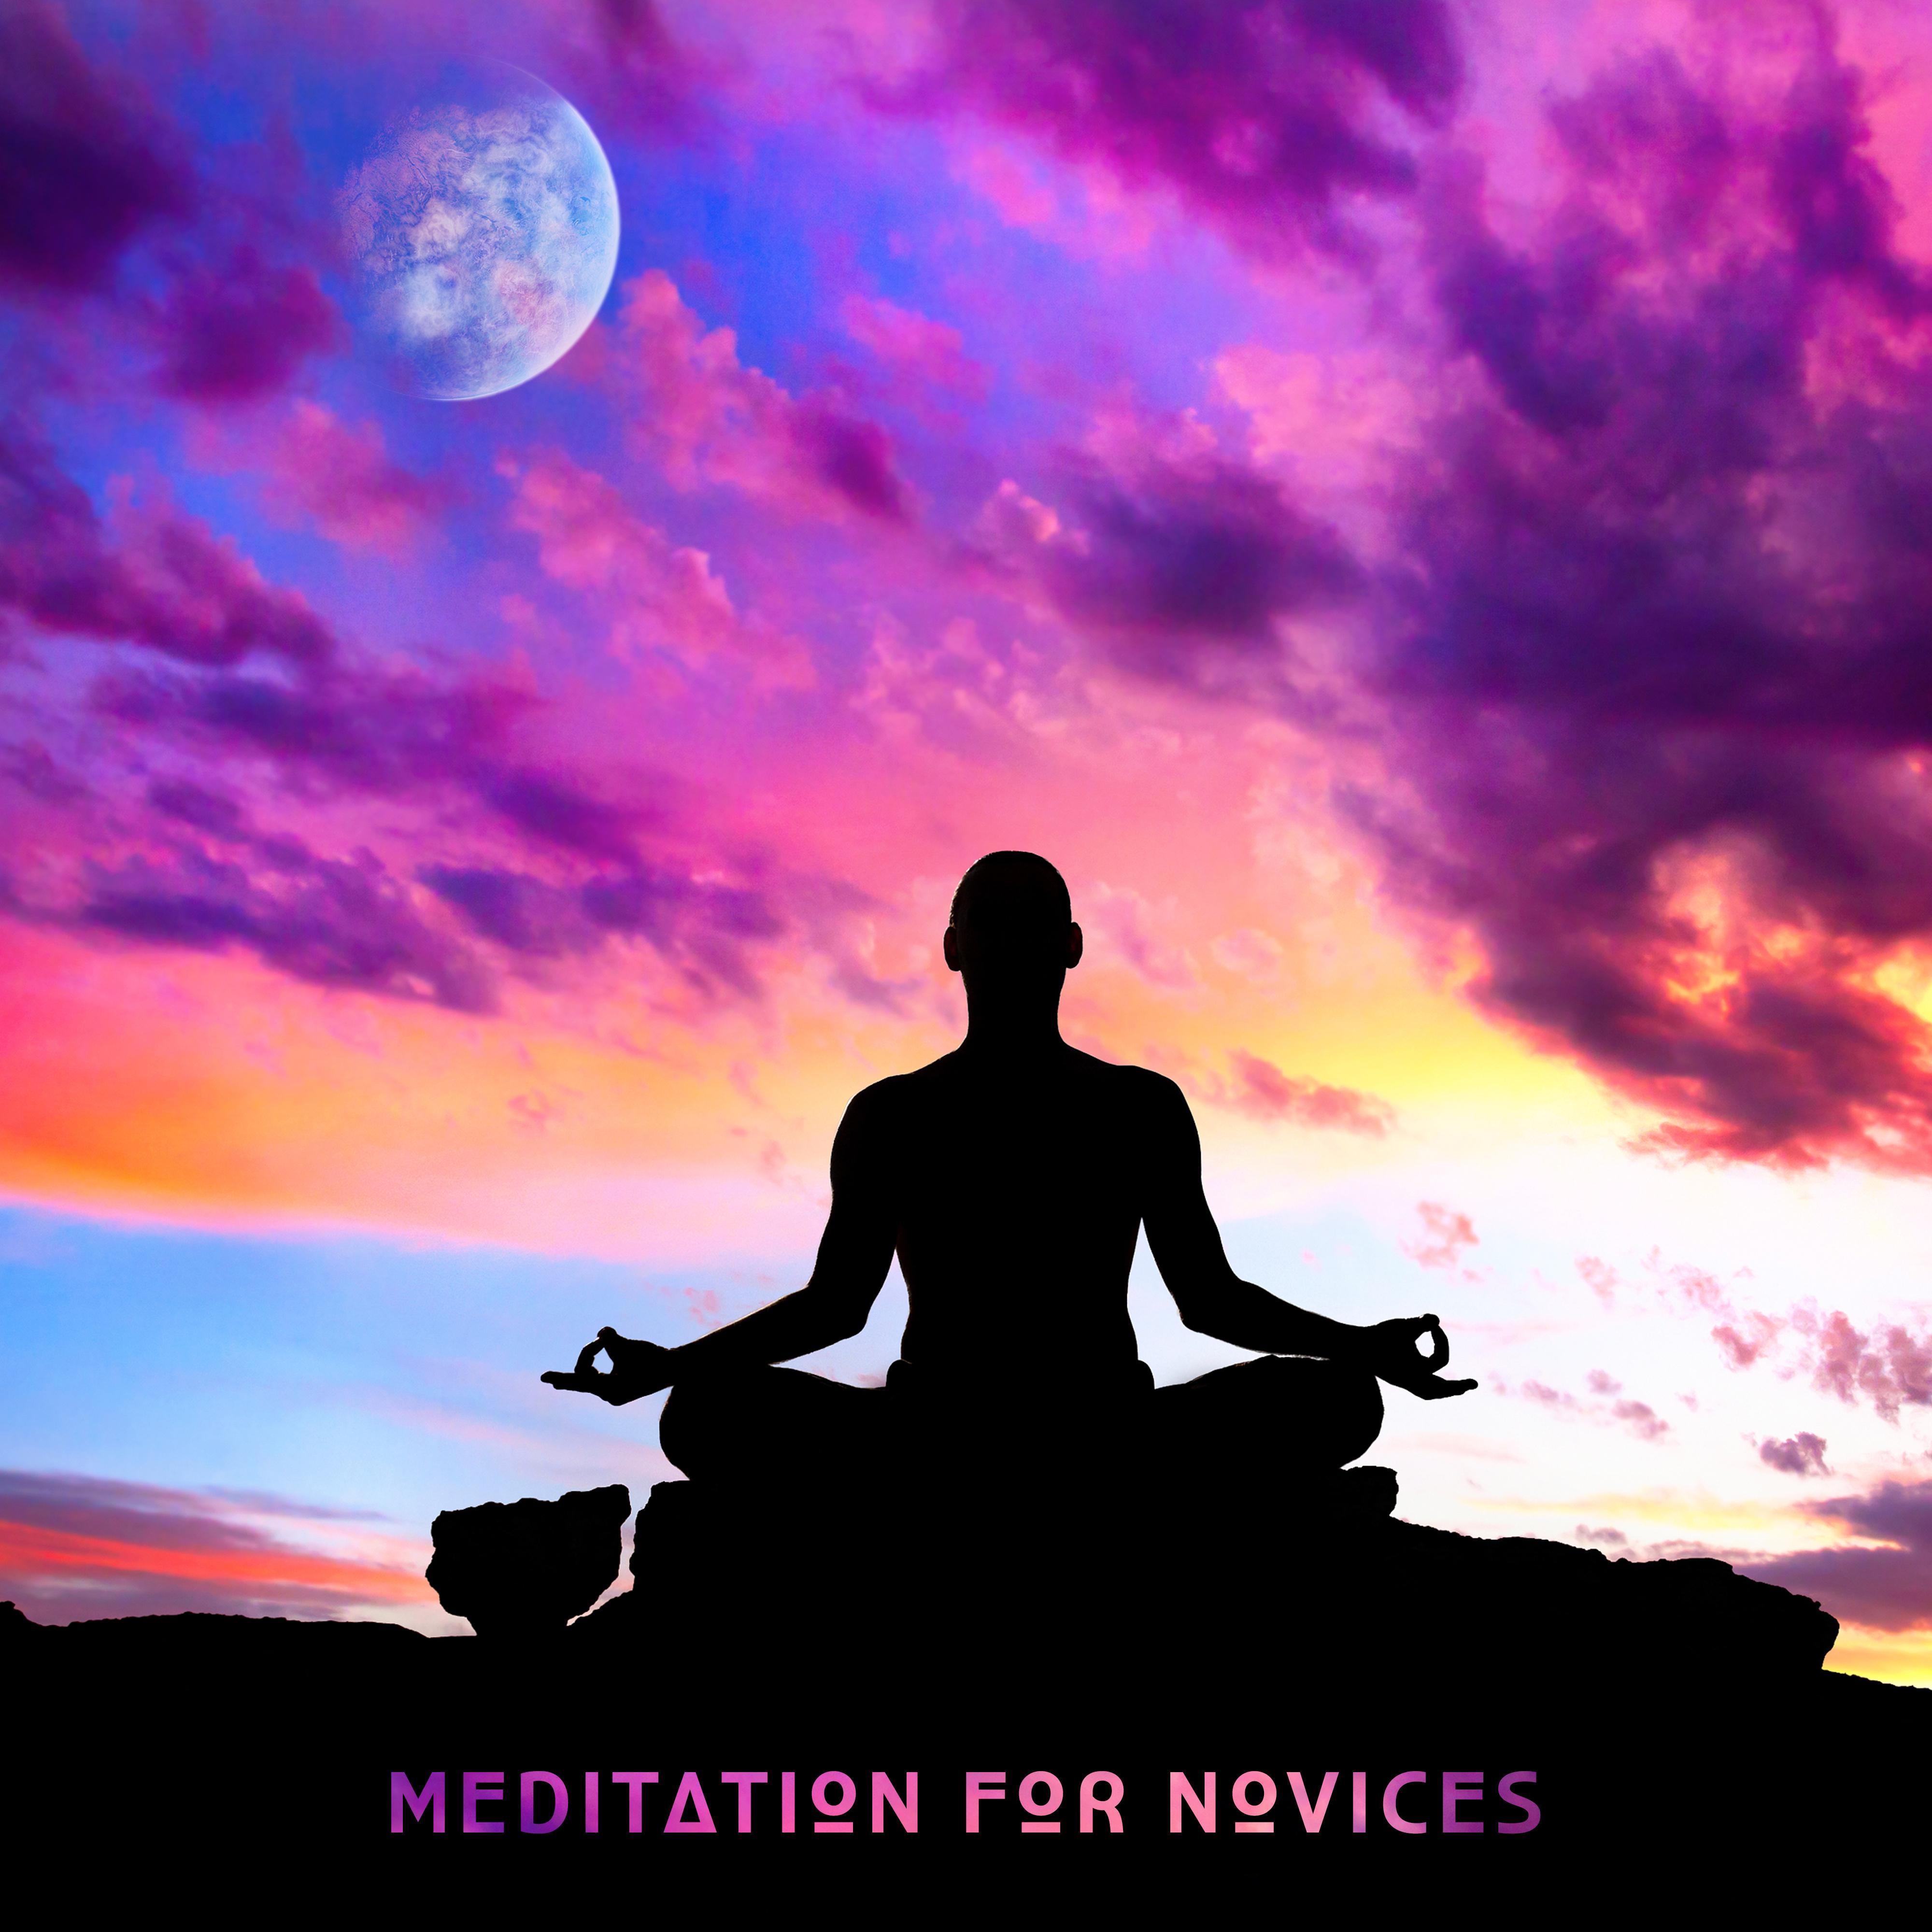 Meditation for Novices: Music and Sounds of the Natural Environment Helpful in the First Steps of the Meditation Path